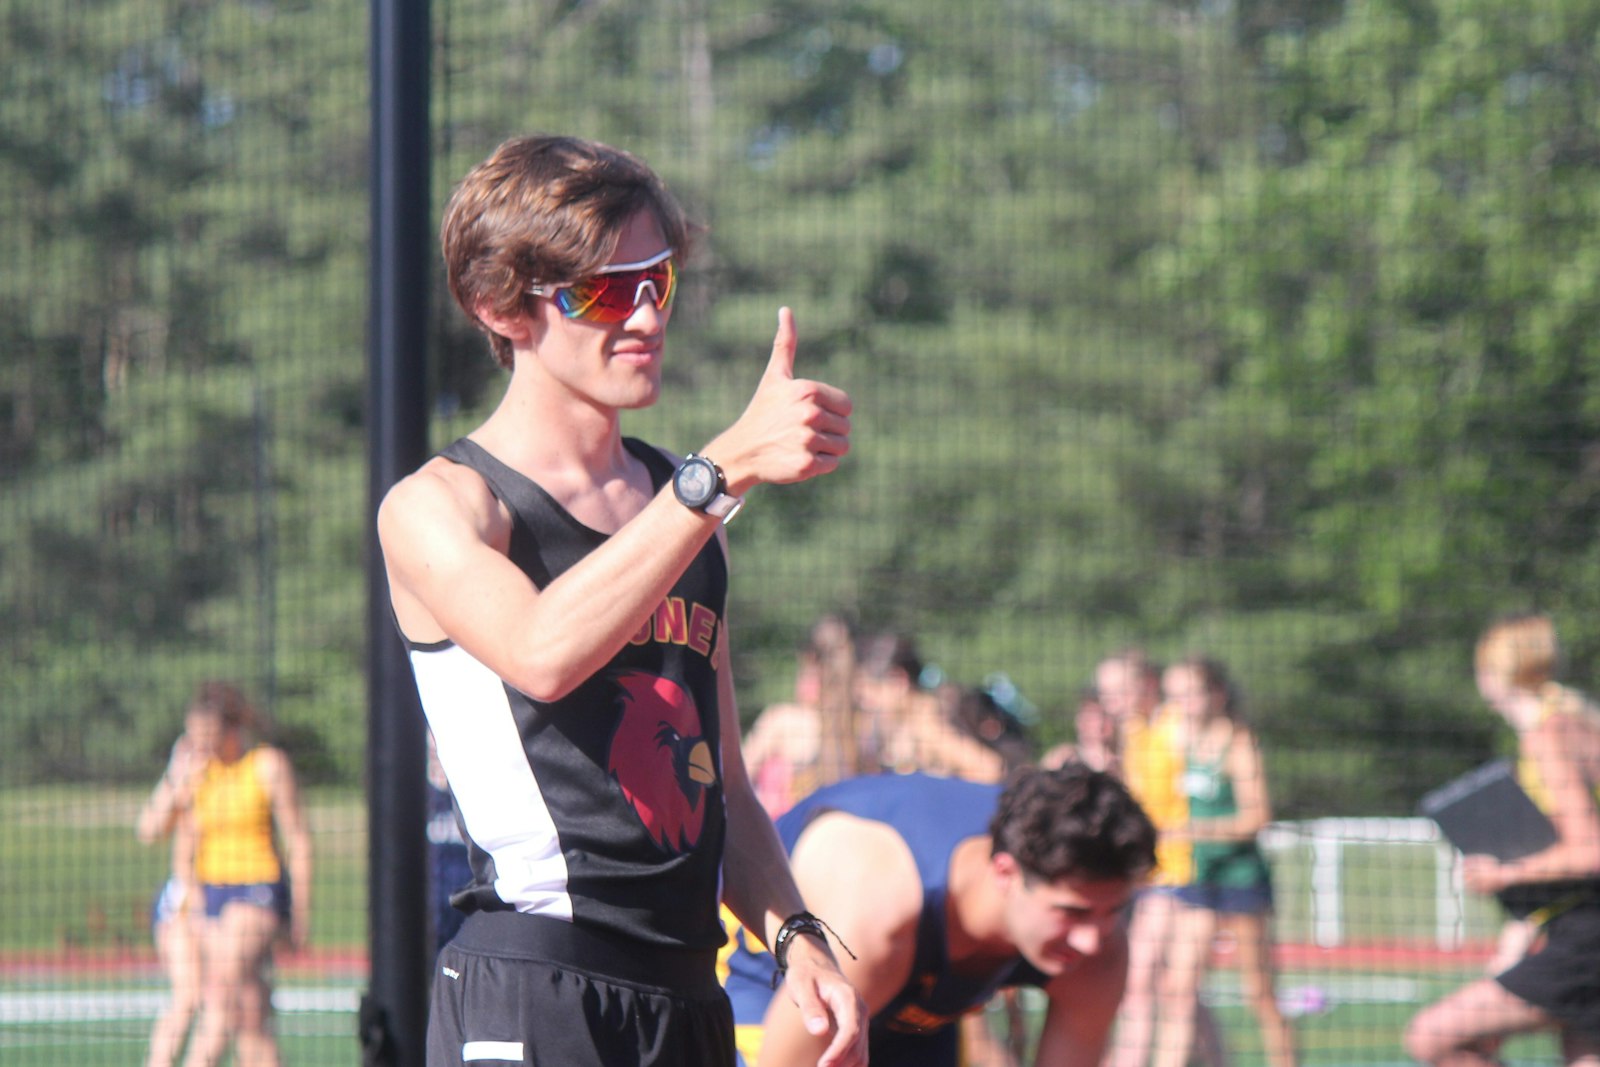 Marine City Cardinal Mooney senior Tyler Lenn successfully defended his title in the Division 4 1600-meter run, winning the race in 4:16.43. (Wright Wilson | Special to Detroit Catholic)